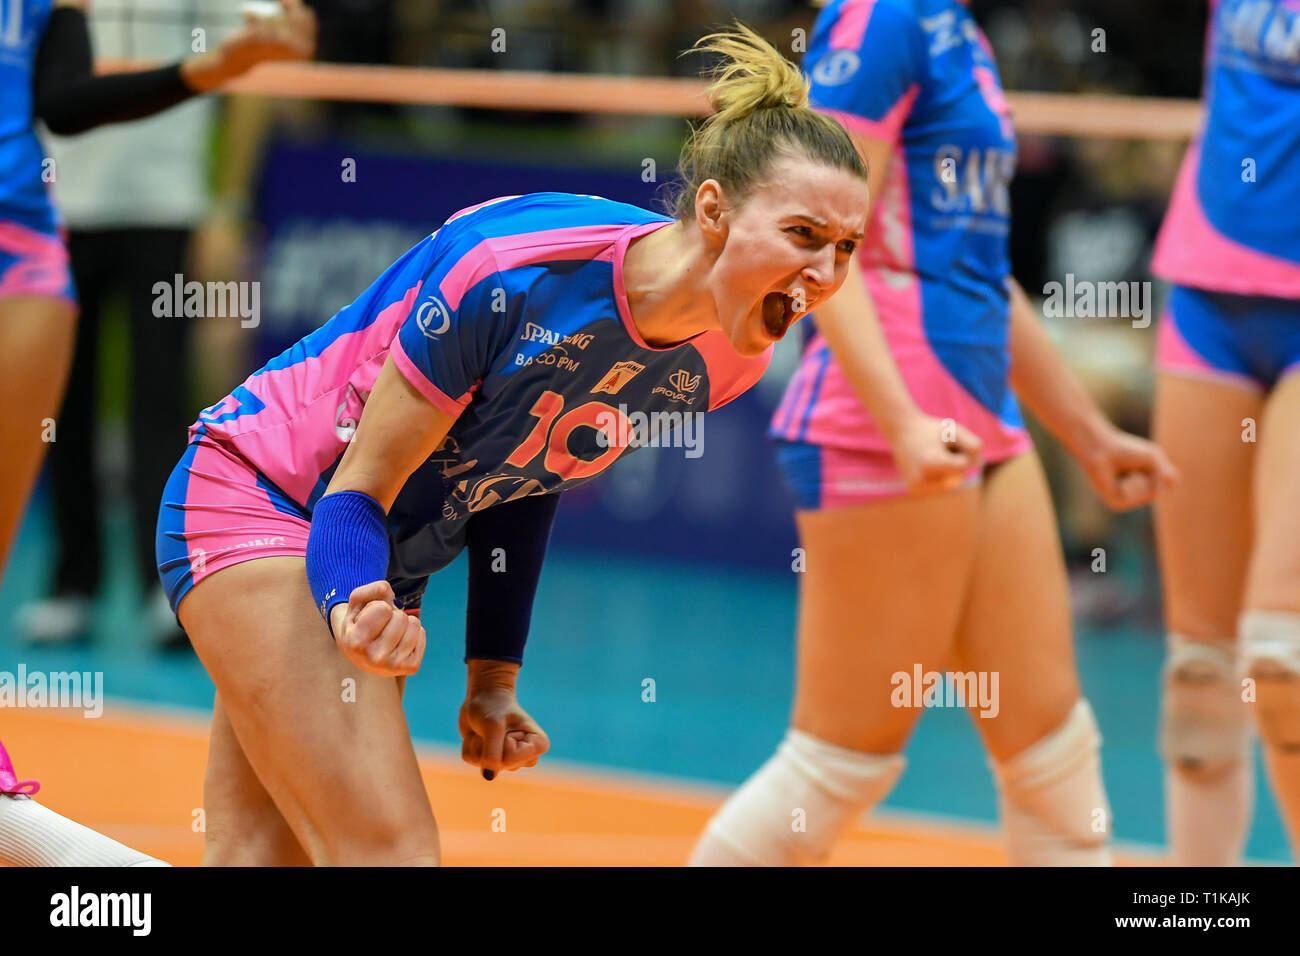 Candy Arena, Monza, Italy. 27th March, 2019. CEV Volleyball Challenge Cup  women, Final, 2nd leg. Edina Begic of Saugella Monza exultation after the match  point that gives the CEV Challenge Cup to